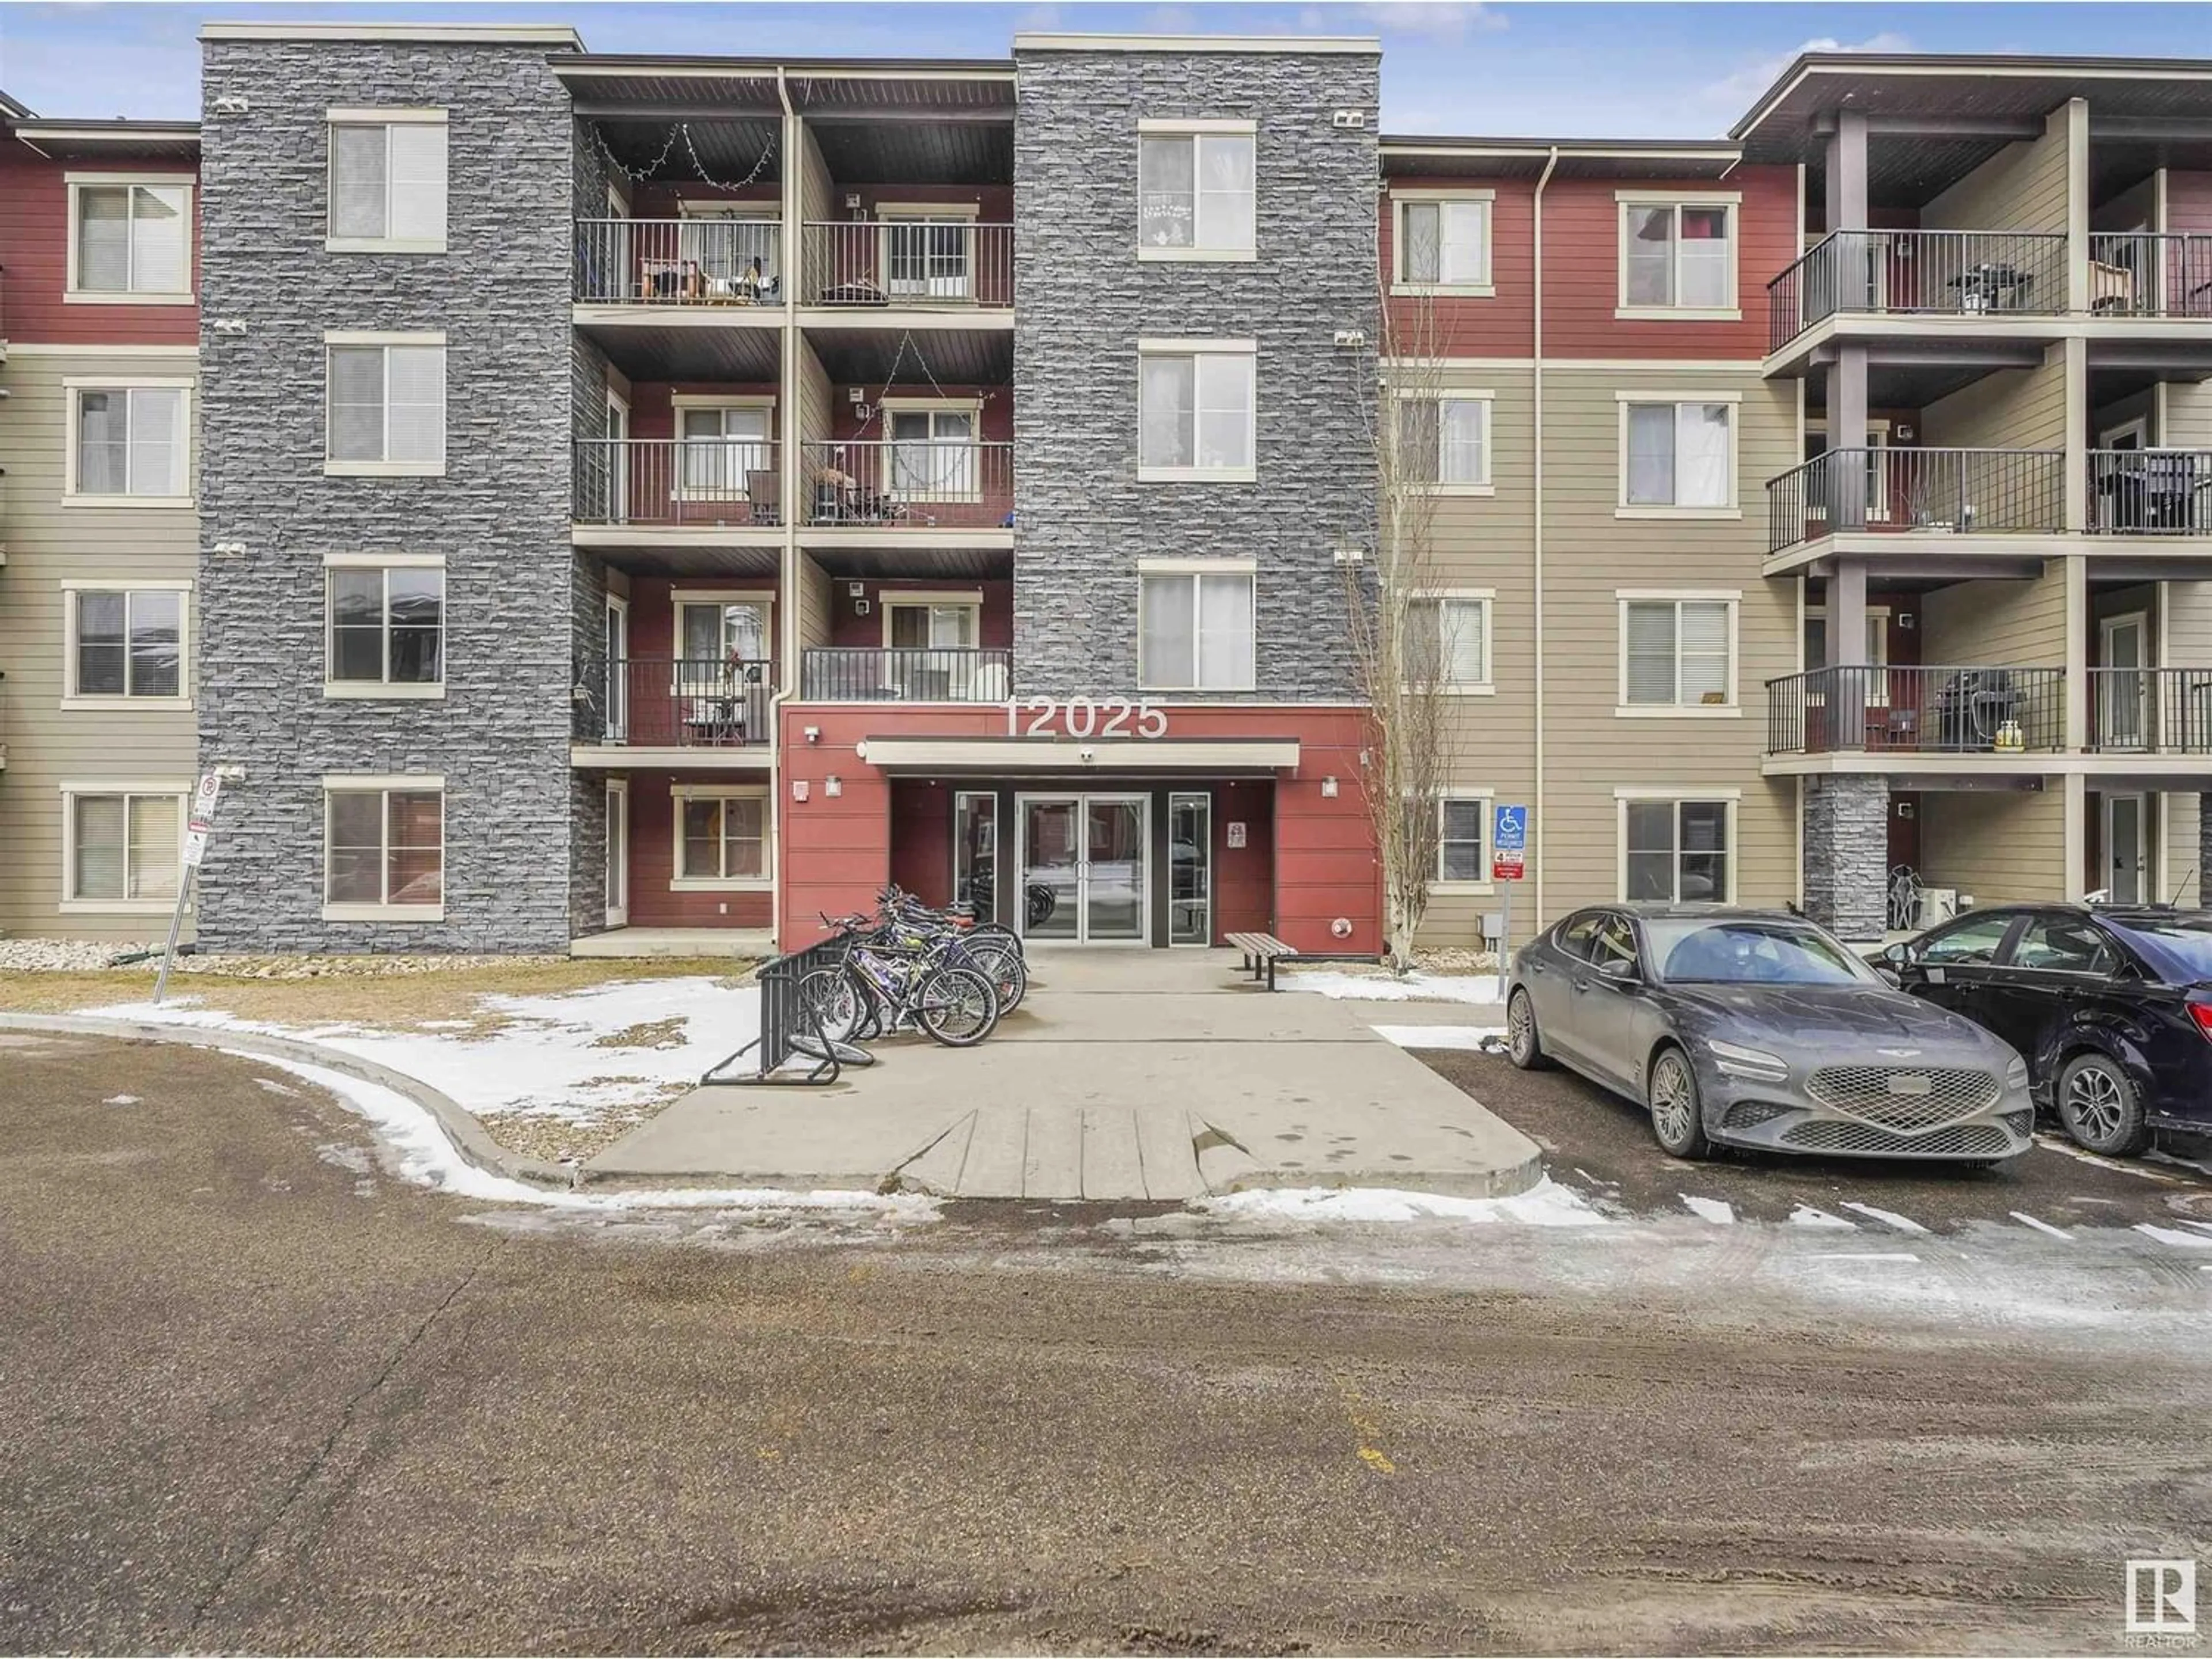 A pic from exterior of the house or condo for #402 12025 22 AVE SW AV SW, Edmonton Alberta T6W2Y1